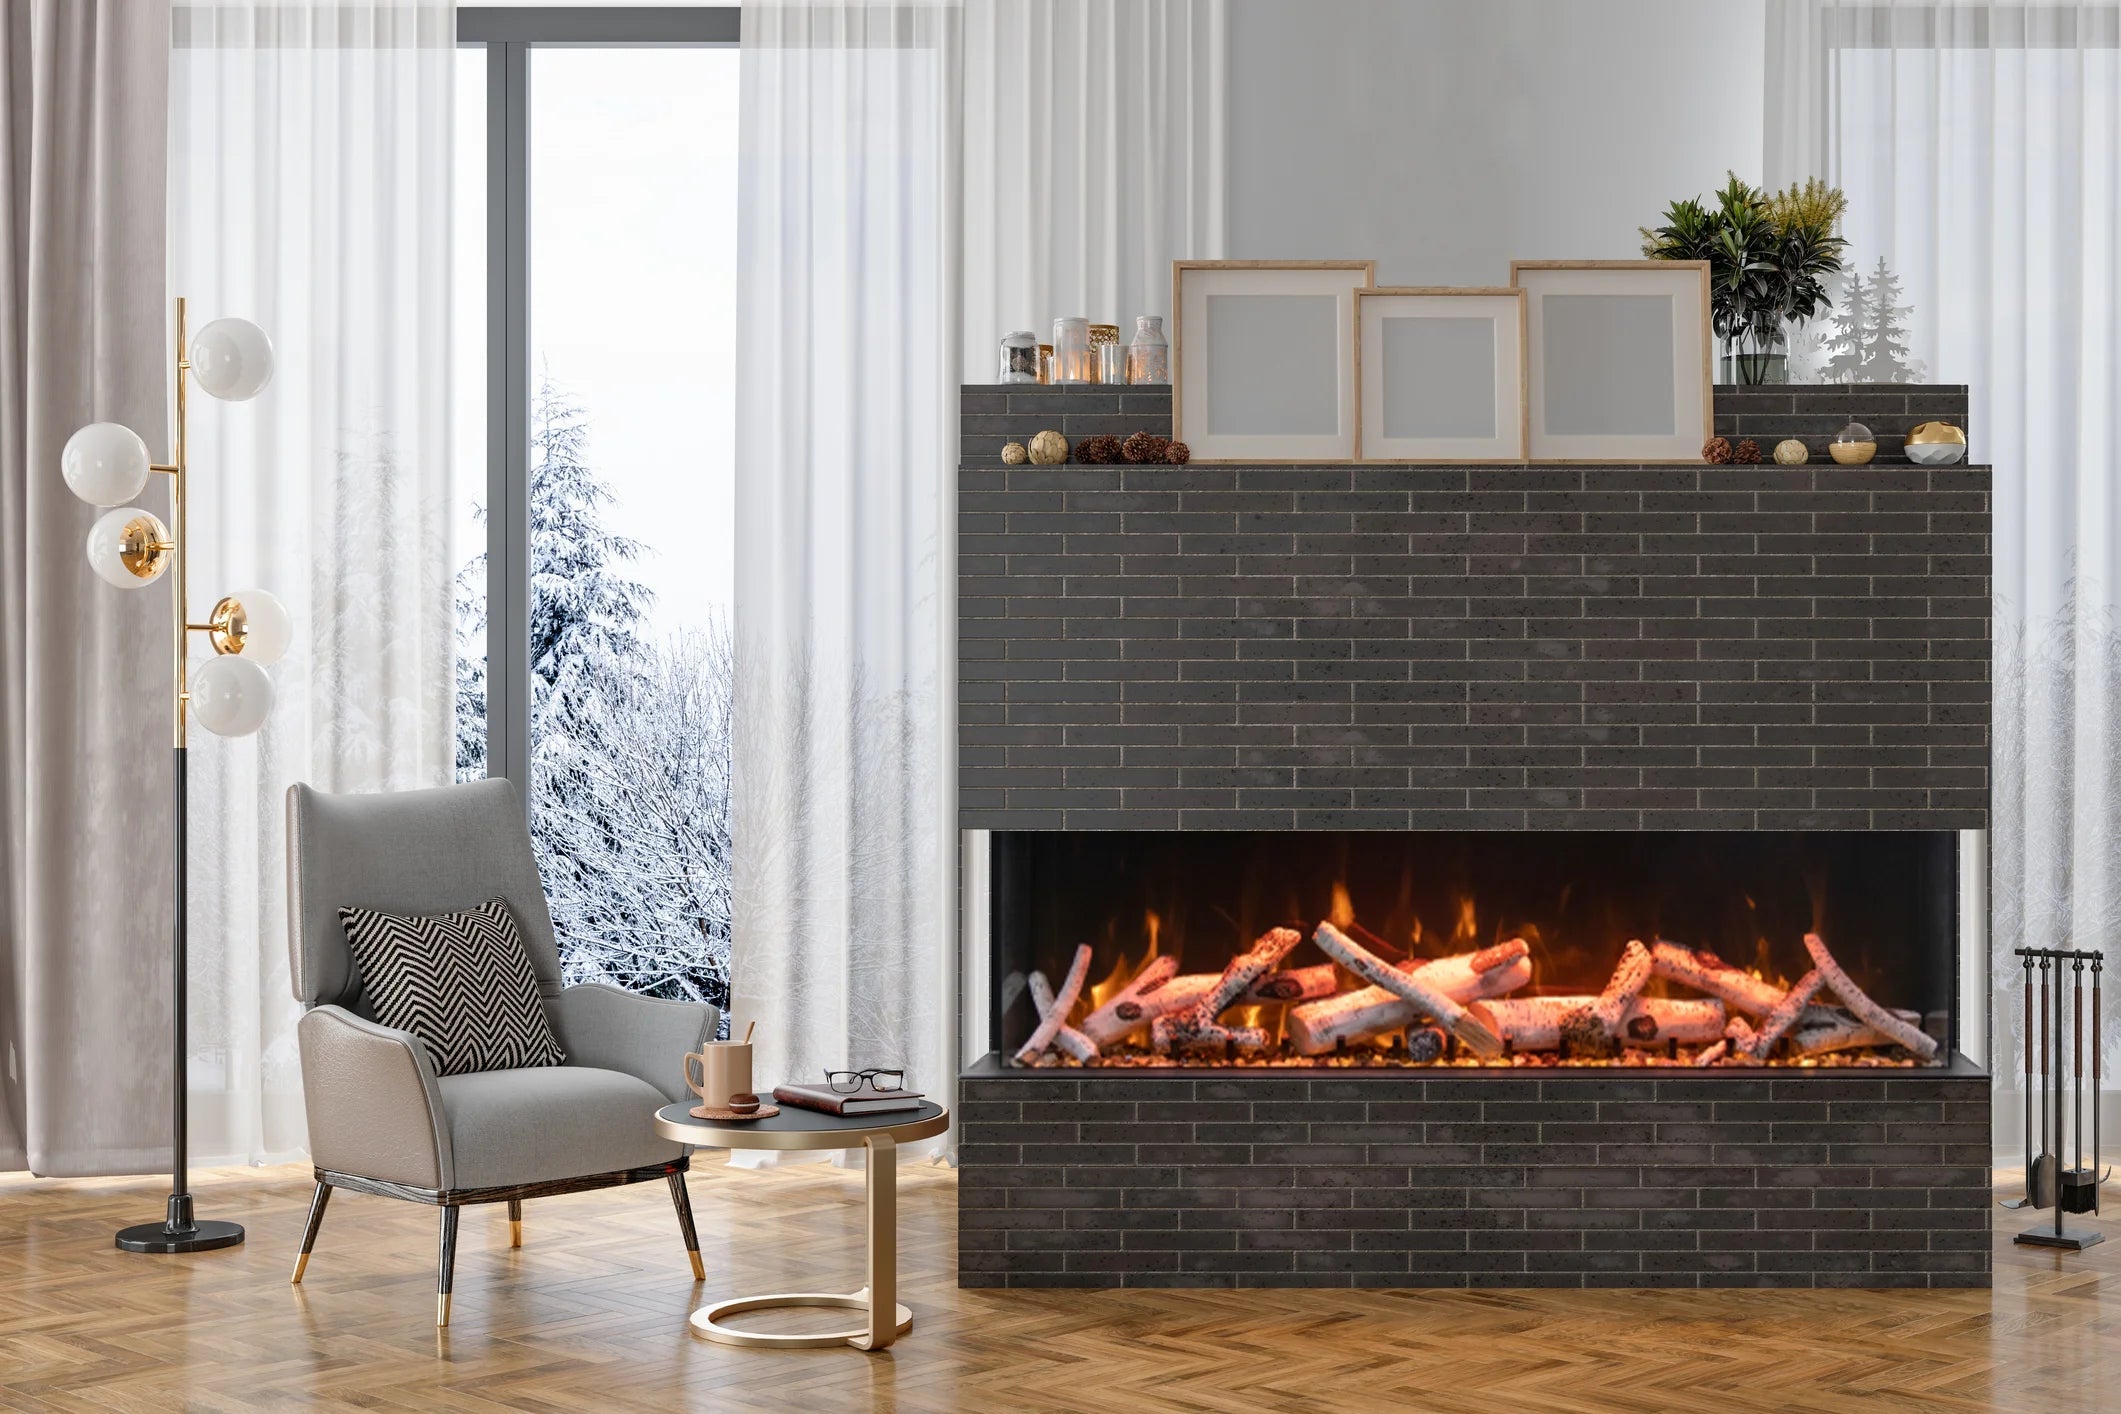 Amantii Tru-View XL Deep 50" Built-In Three Sided Electric Fireplace -50-TRU-VIEW-XL-DEEP- Lifestyle Living Room With Brick Fireplace